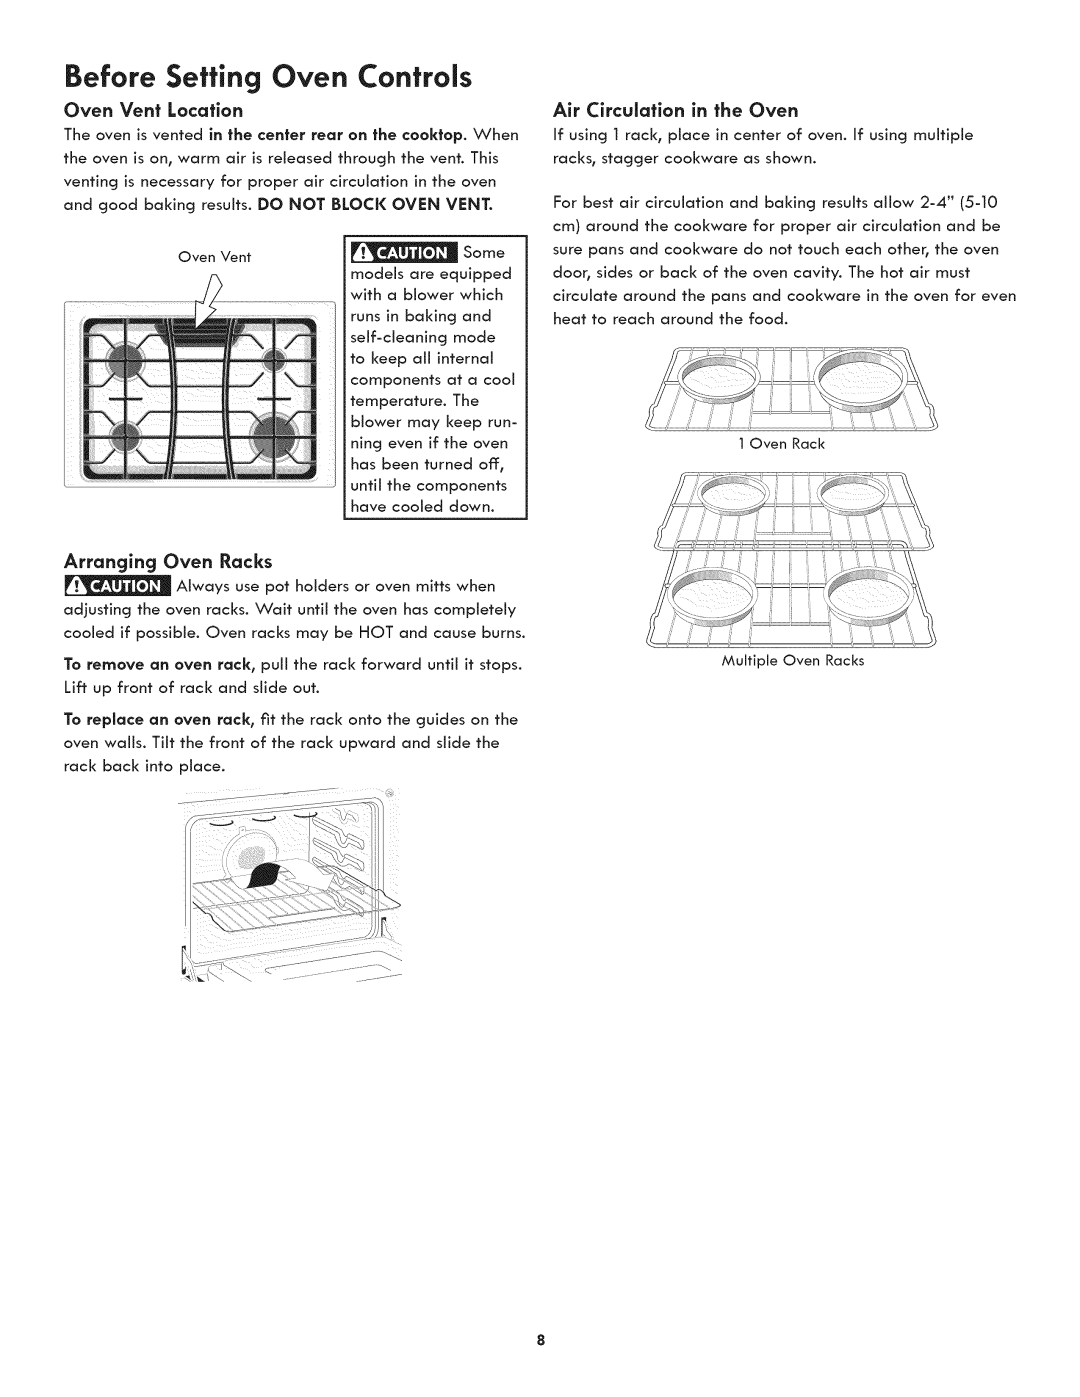 Kenmore 790.3105 manual Before Setting Oven Controls, Oven Vent Location, Arranging, To remove 